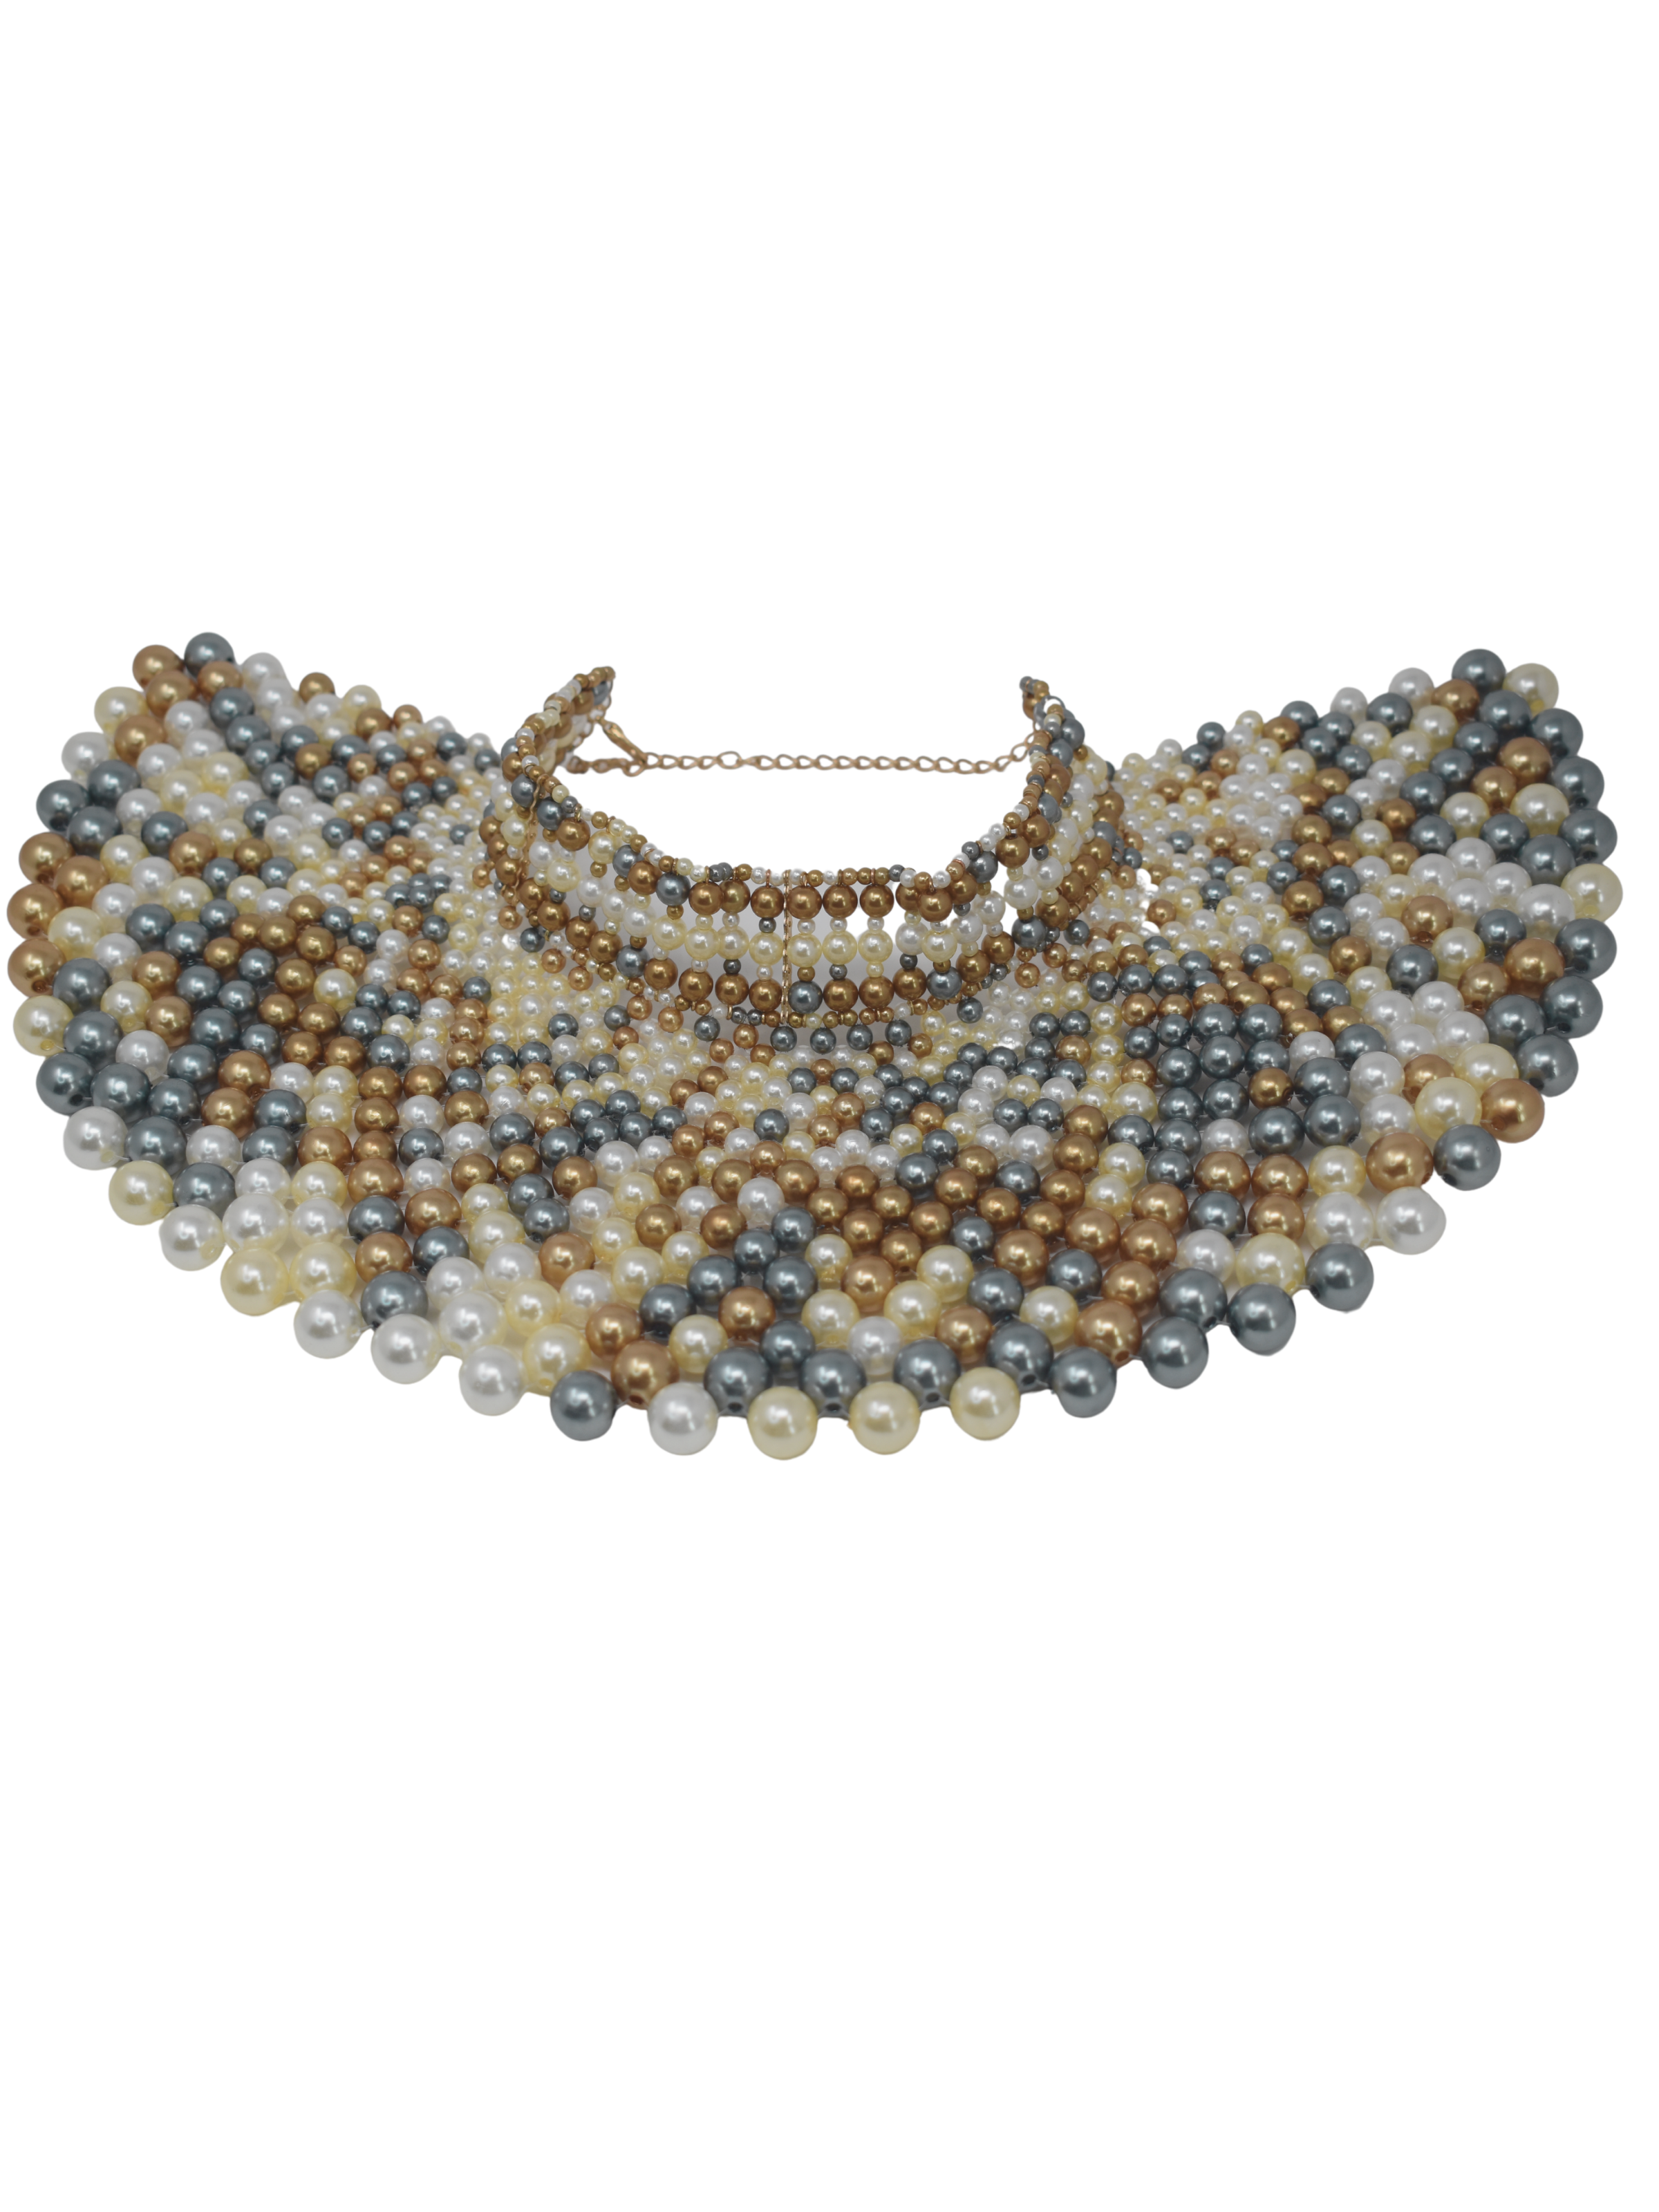 Meria White Gold and Silver Pearl Statement Necklace with Gold Accents